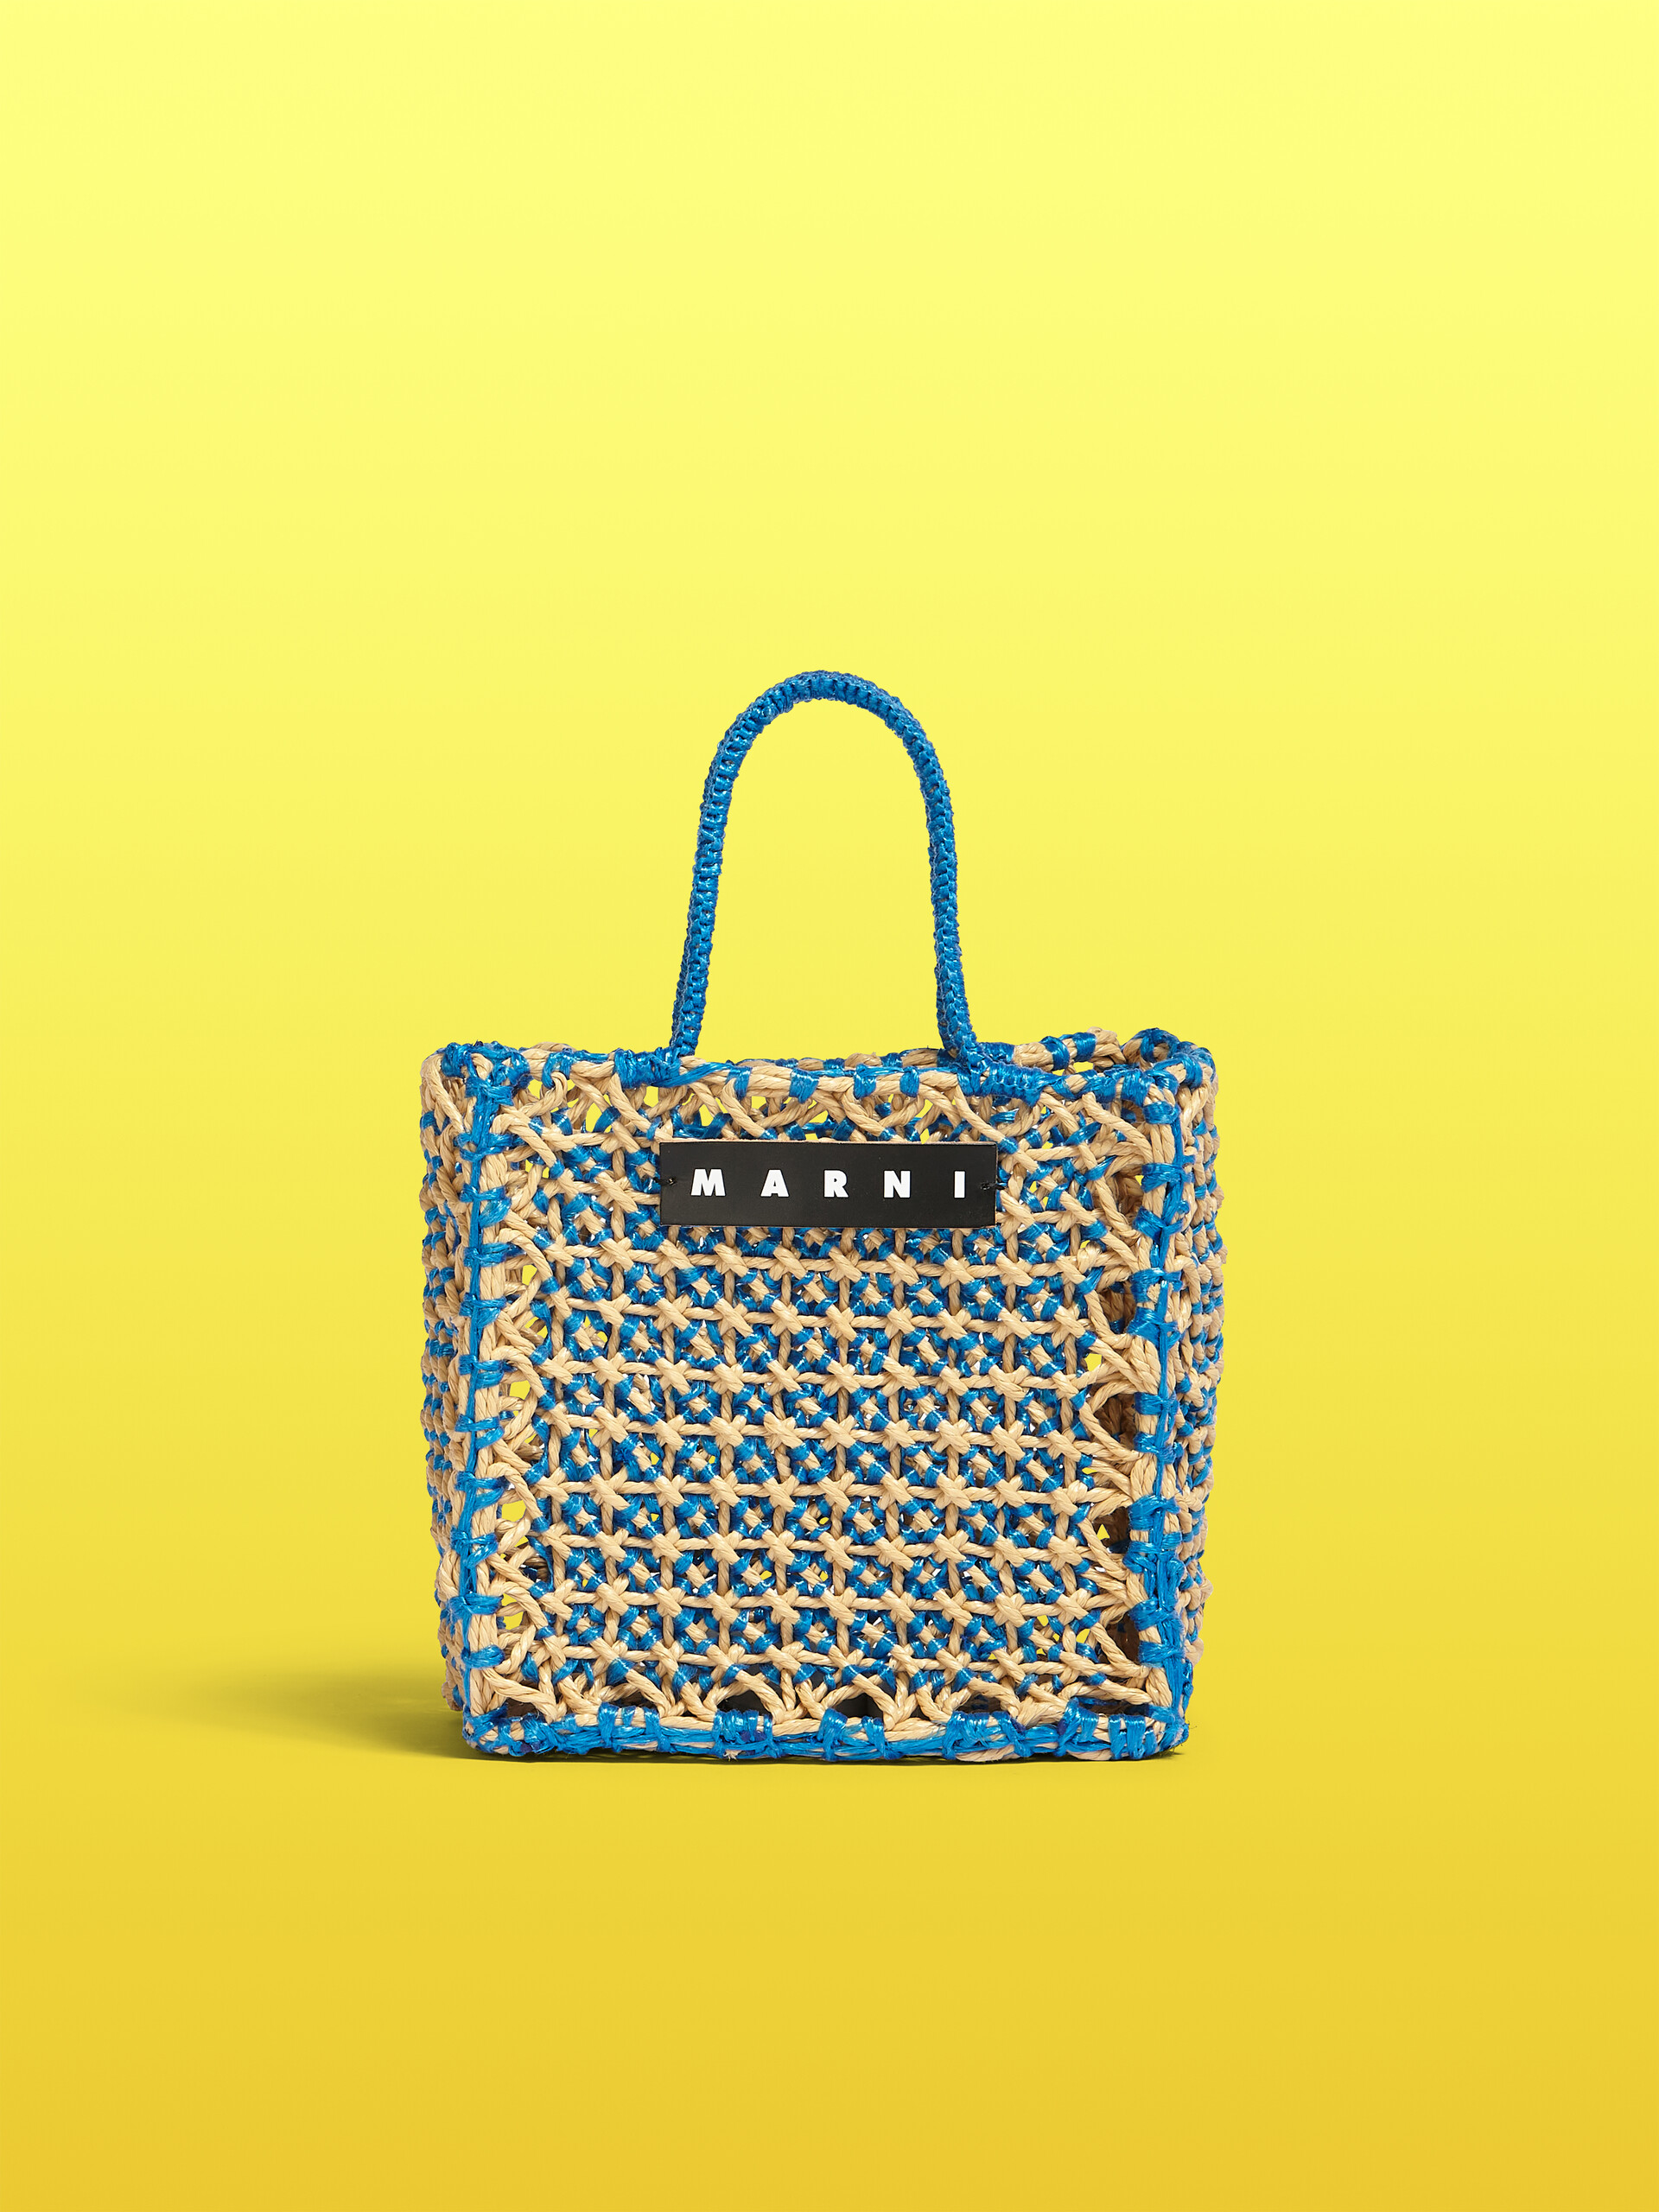 MARNI MARKET small bag in pale blue and beige crochet - Bags - Image 1